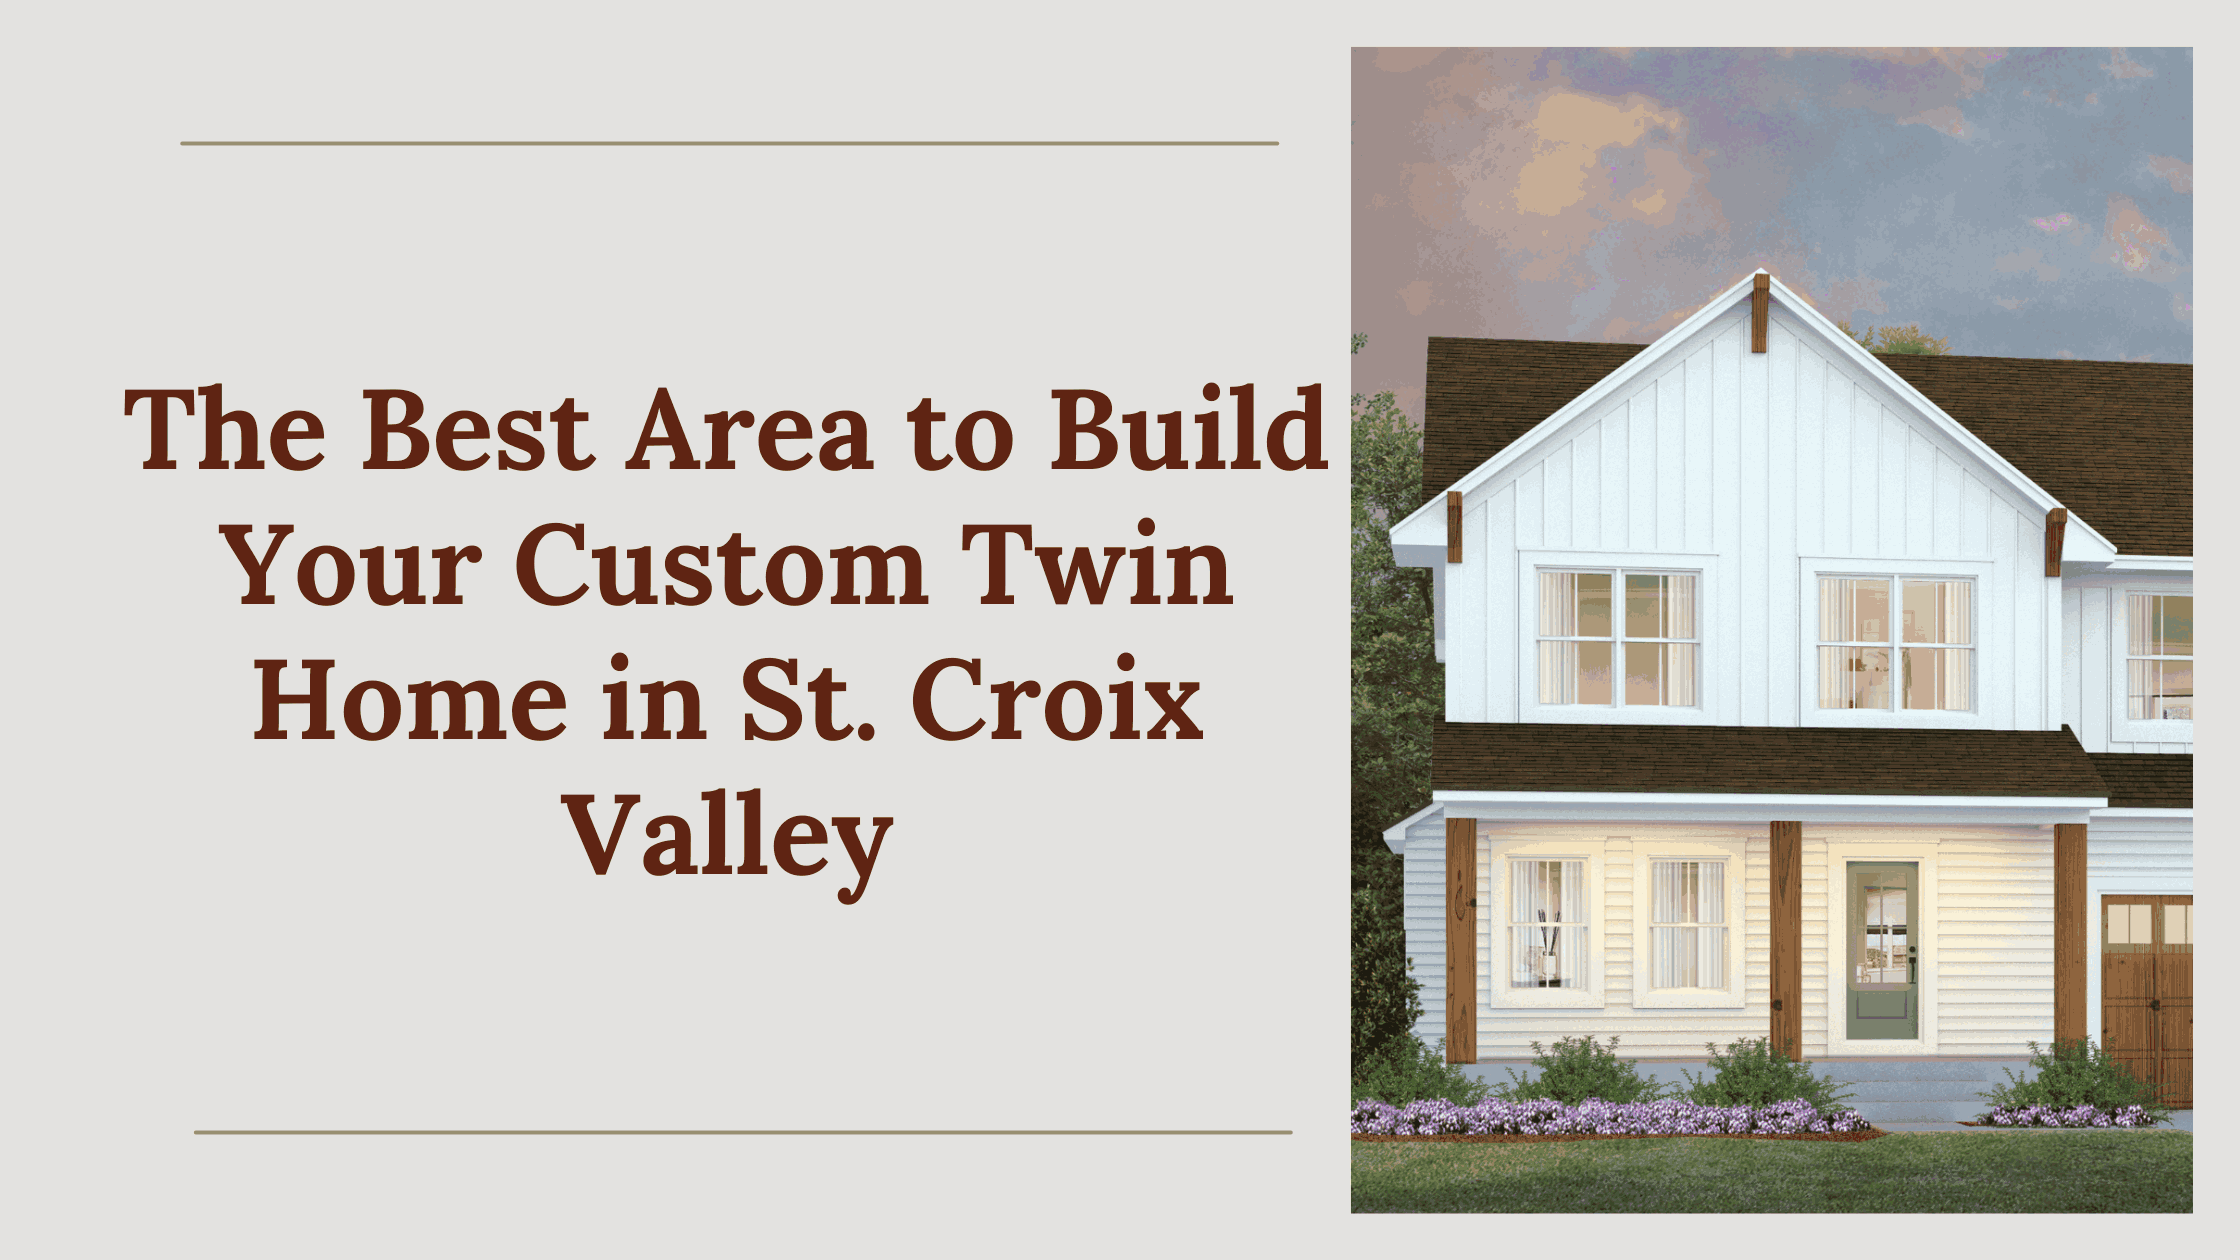 The Best Area to Build Your Custom Home in St. Croix Valley